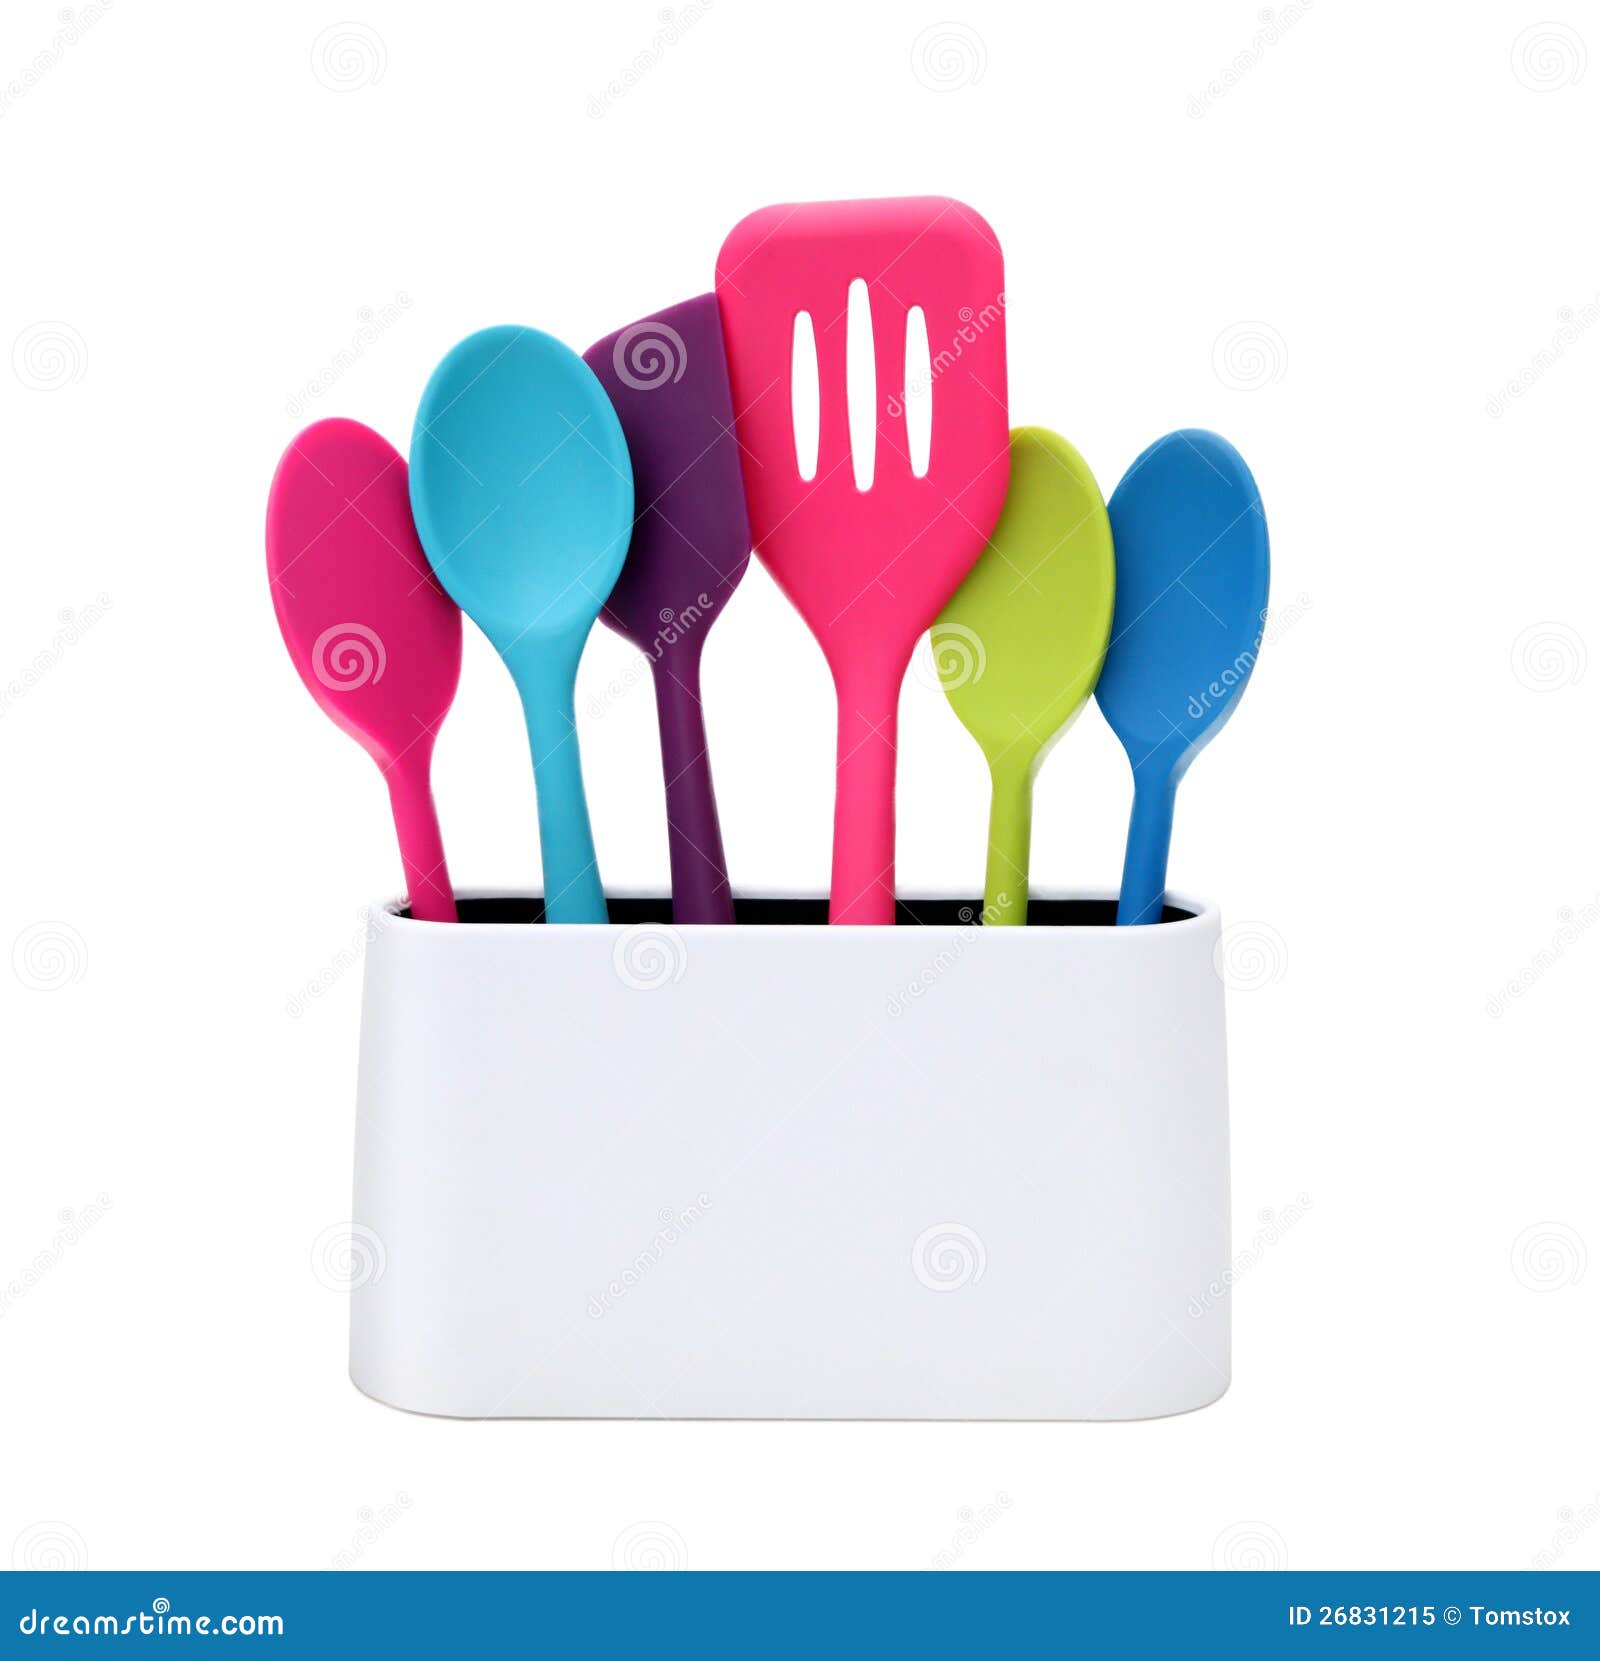 Modern Cooking - Colorful Kitchen Utensils Royalty Free Stock Photo ...